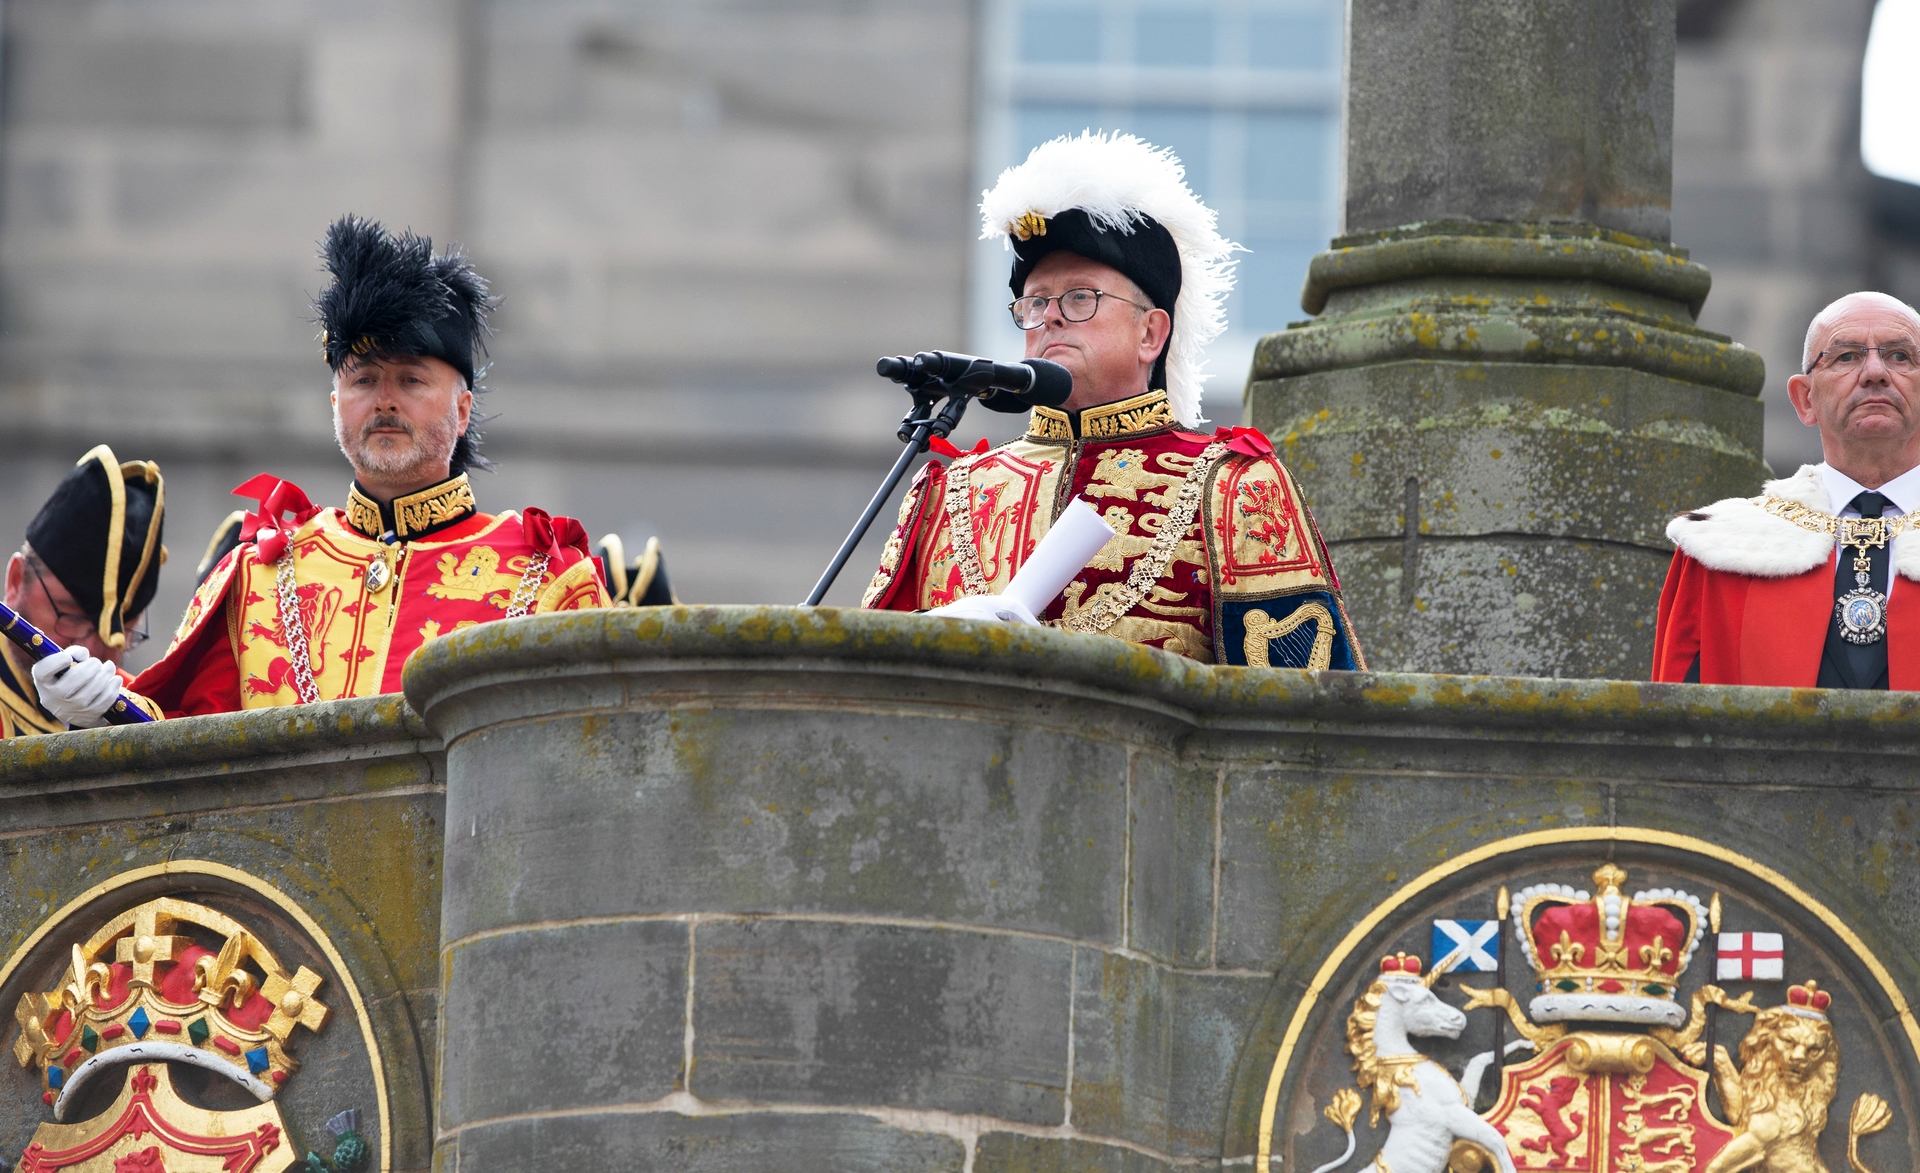 The Lord Lyon King of Arms, Joseph Morrow reads the proclamation of the new King, King Charles III in Edinburgh.  (Image: Ewan Bootman / SNS Group)